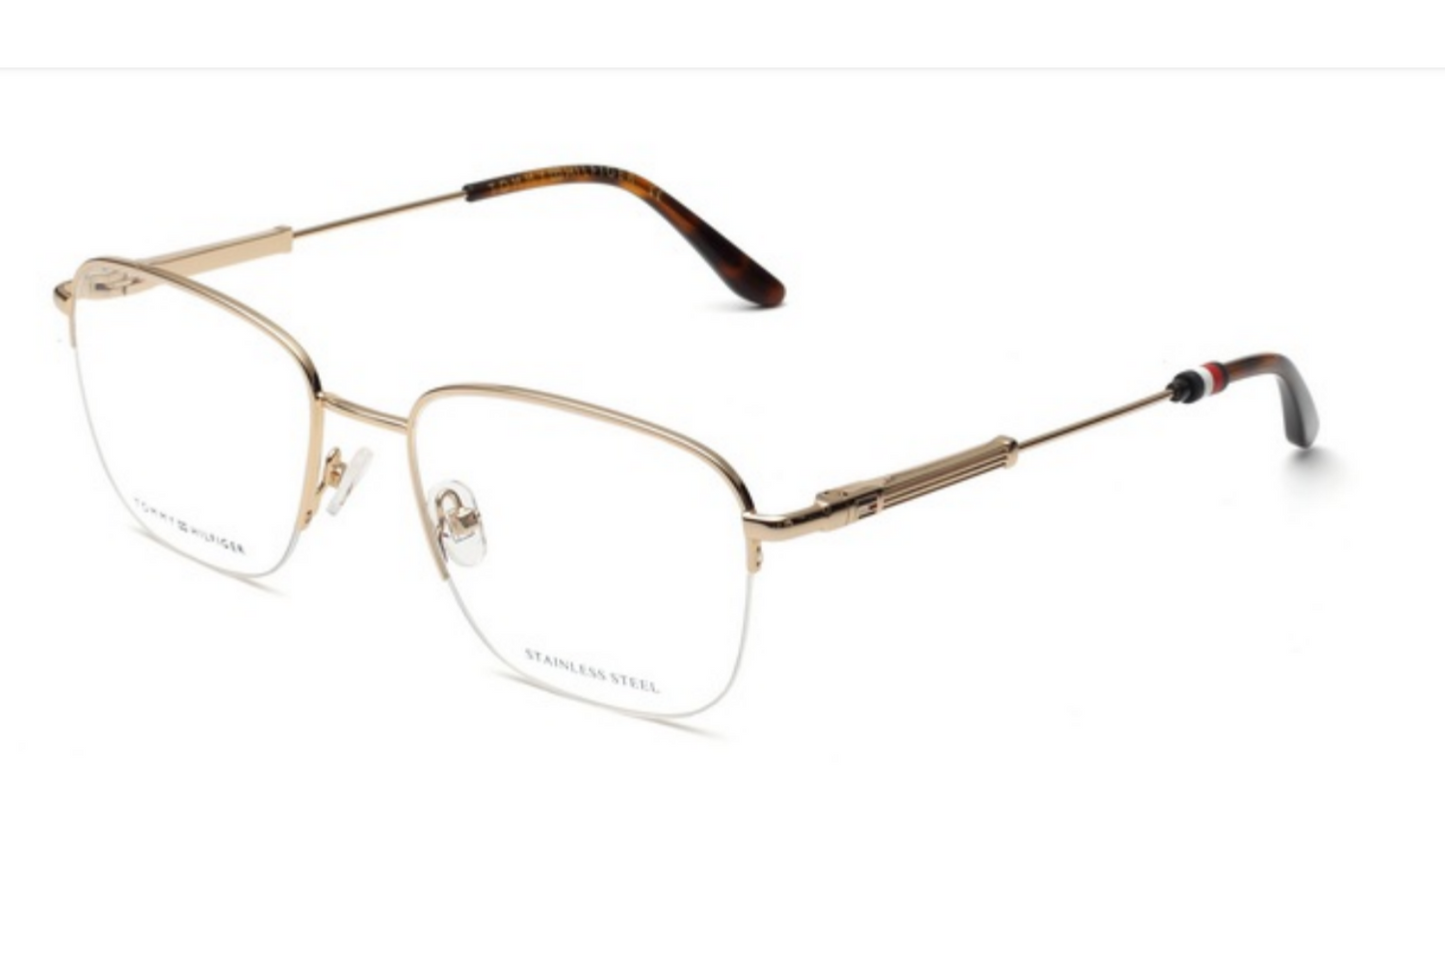 Tommy Hilfiger Frame TH6271 NEW ARRIVAL